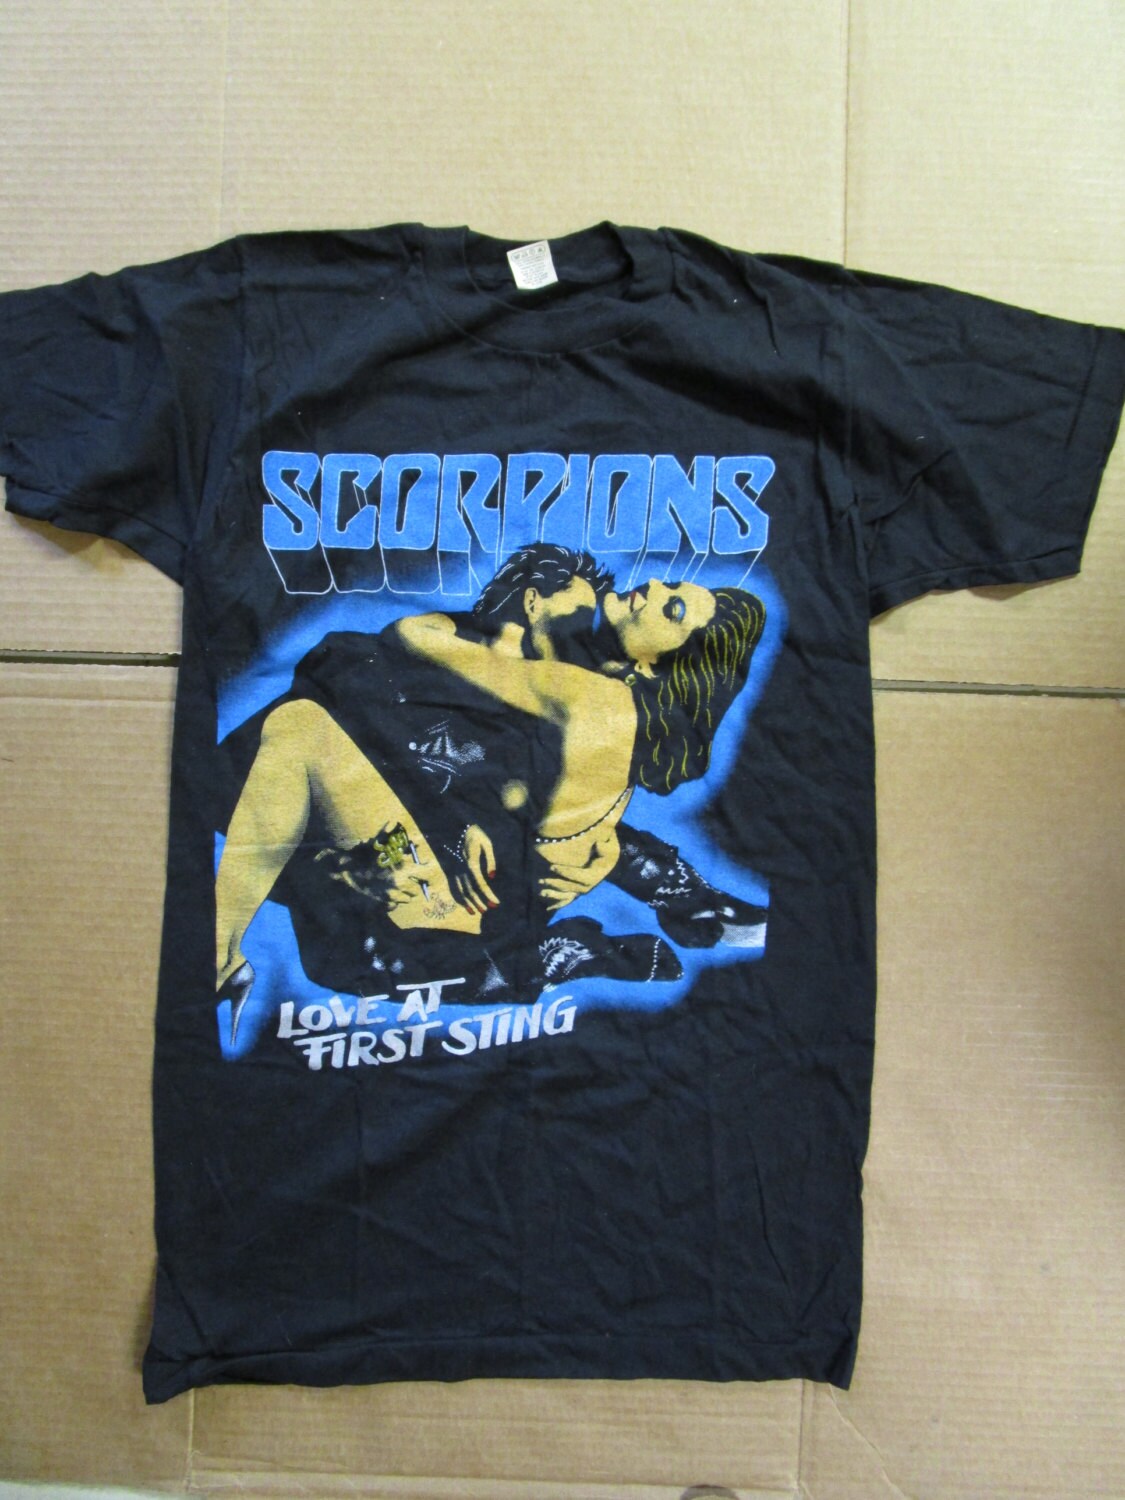 Vintage Scorpions US Tour Shirt 1984 Love at First Sting Rare